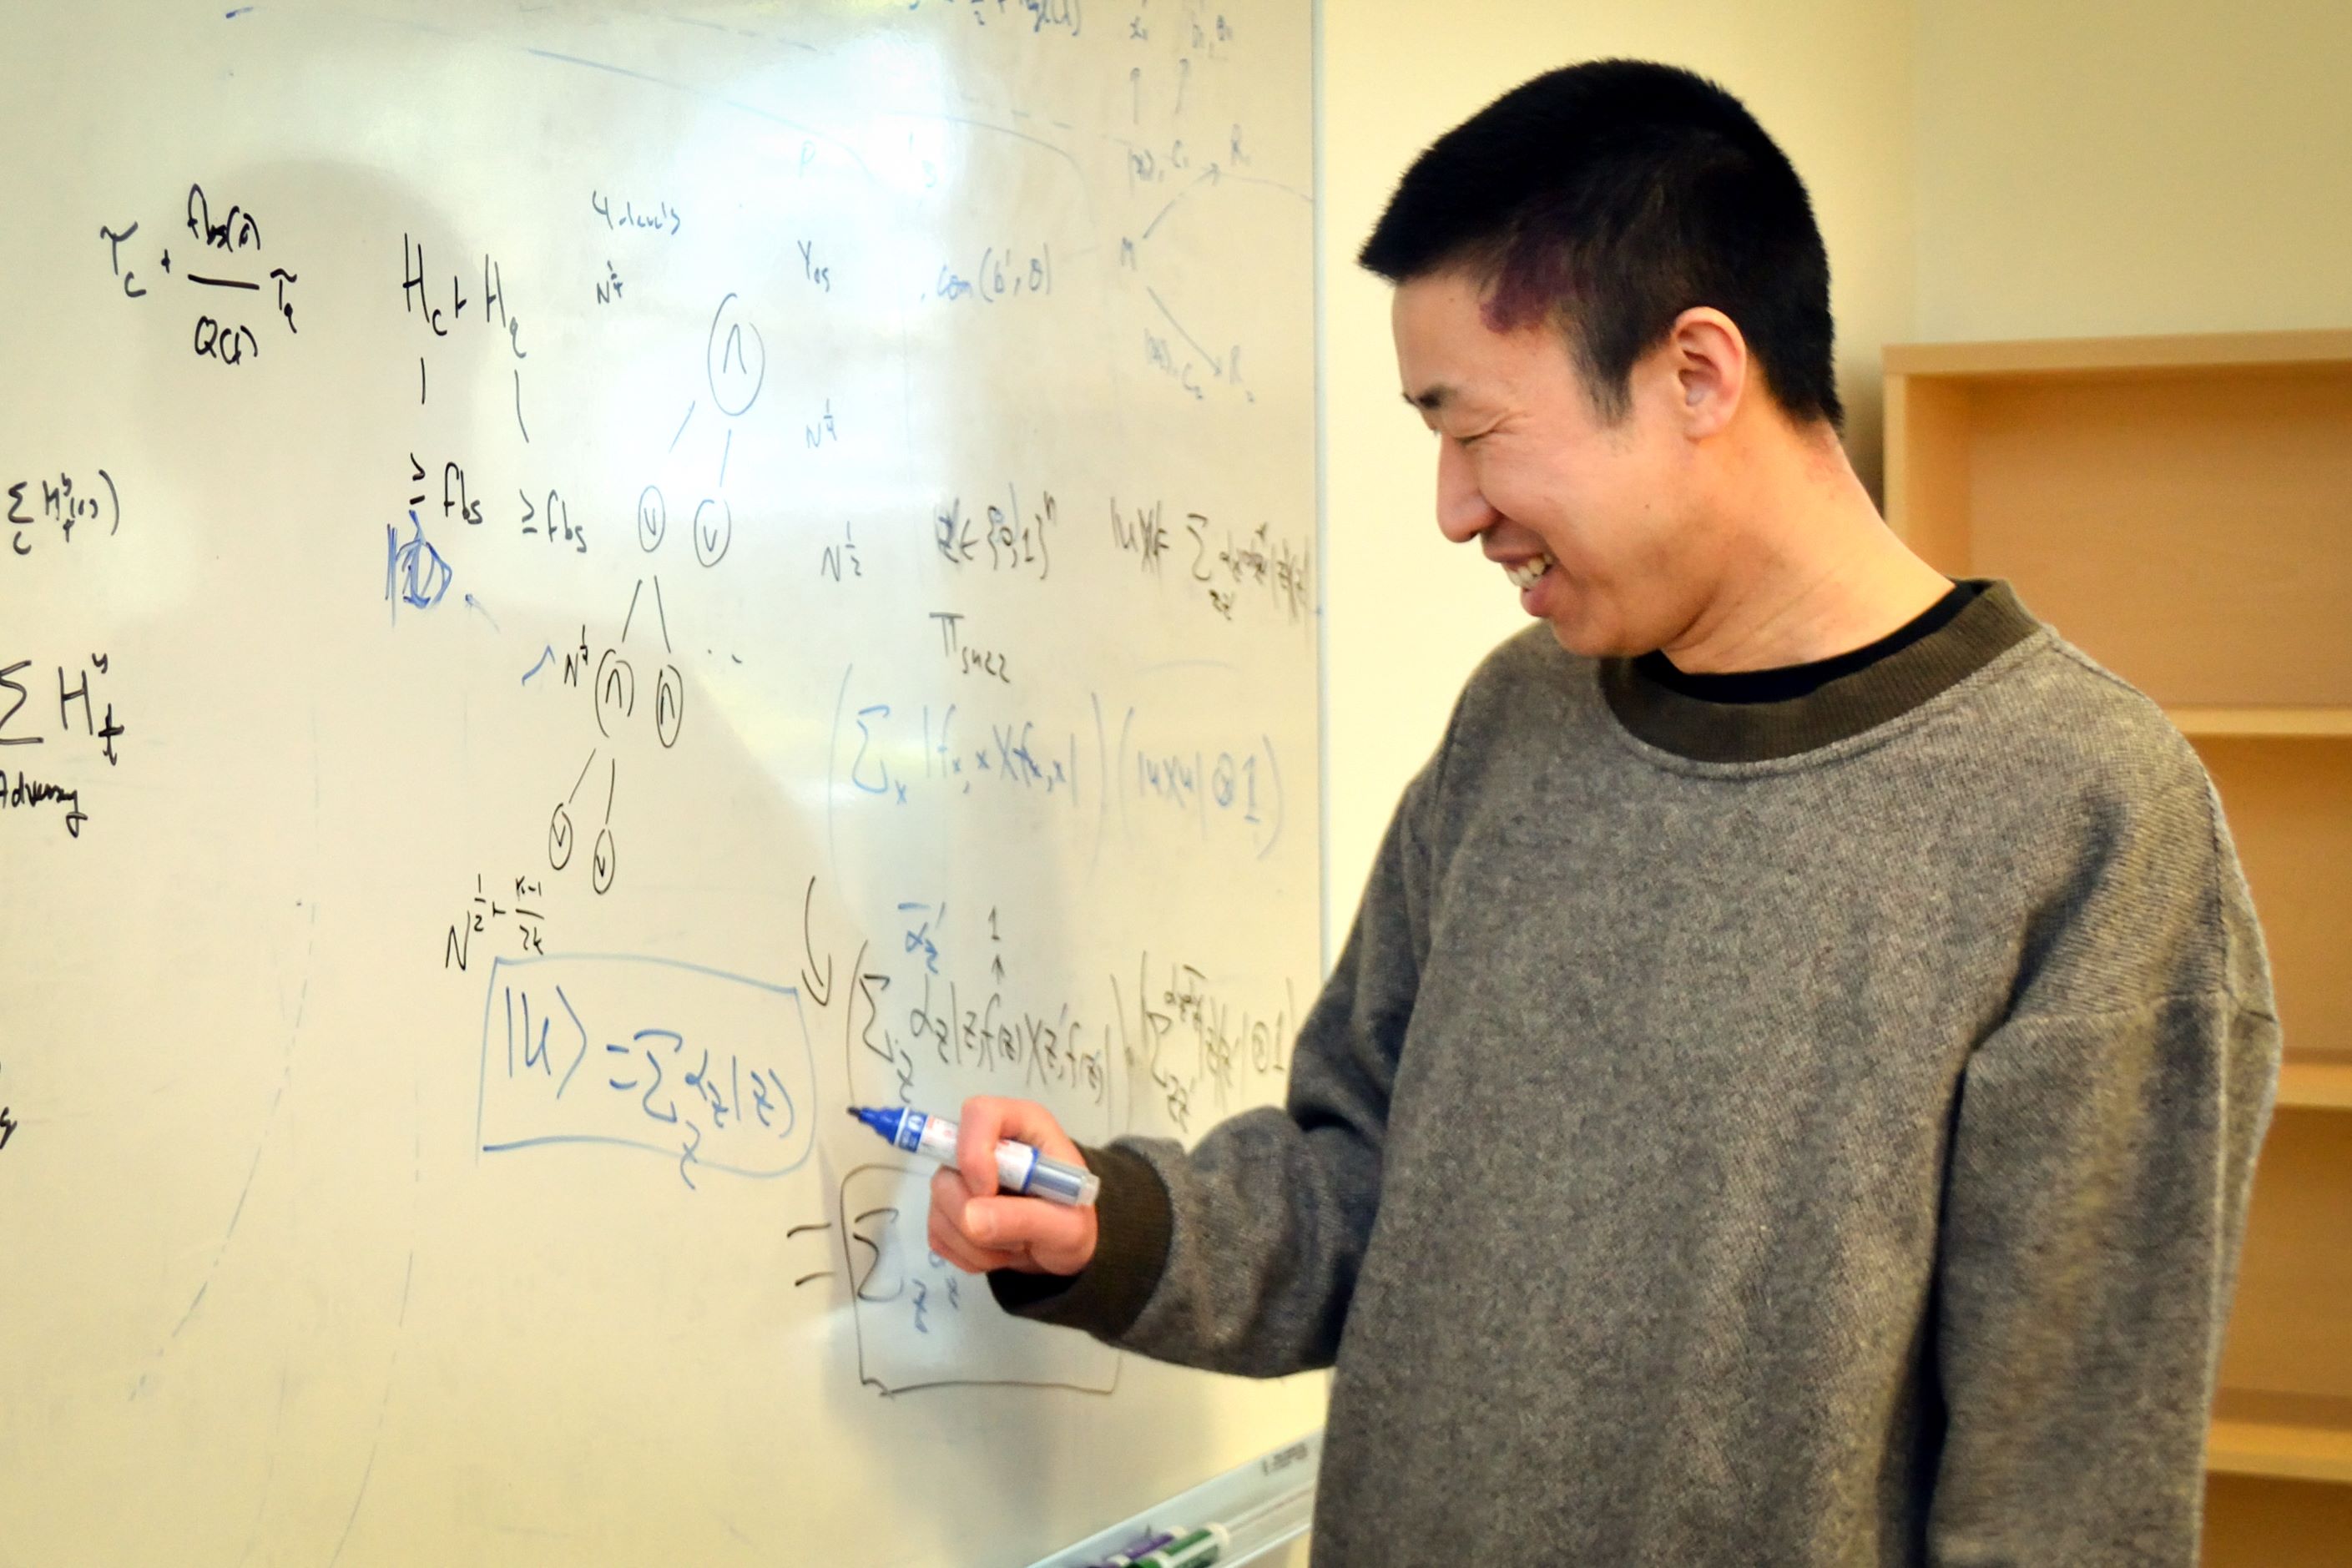 Fang Song faces a white board on which is written many calculations. He is smiling and wearing a gray sweater